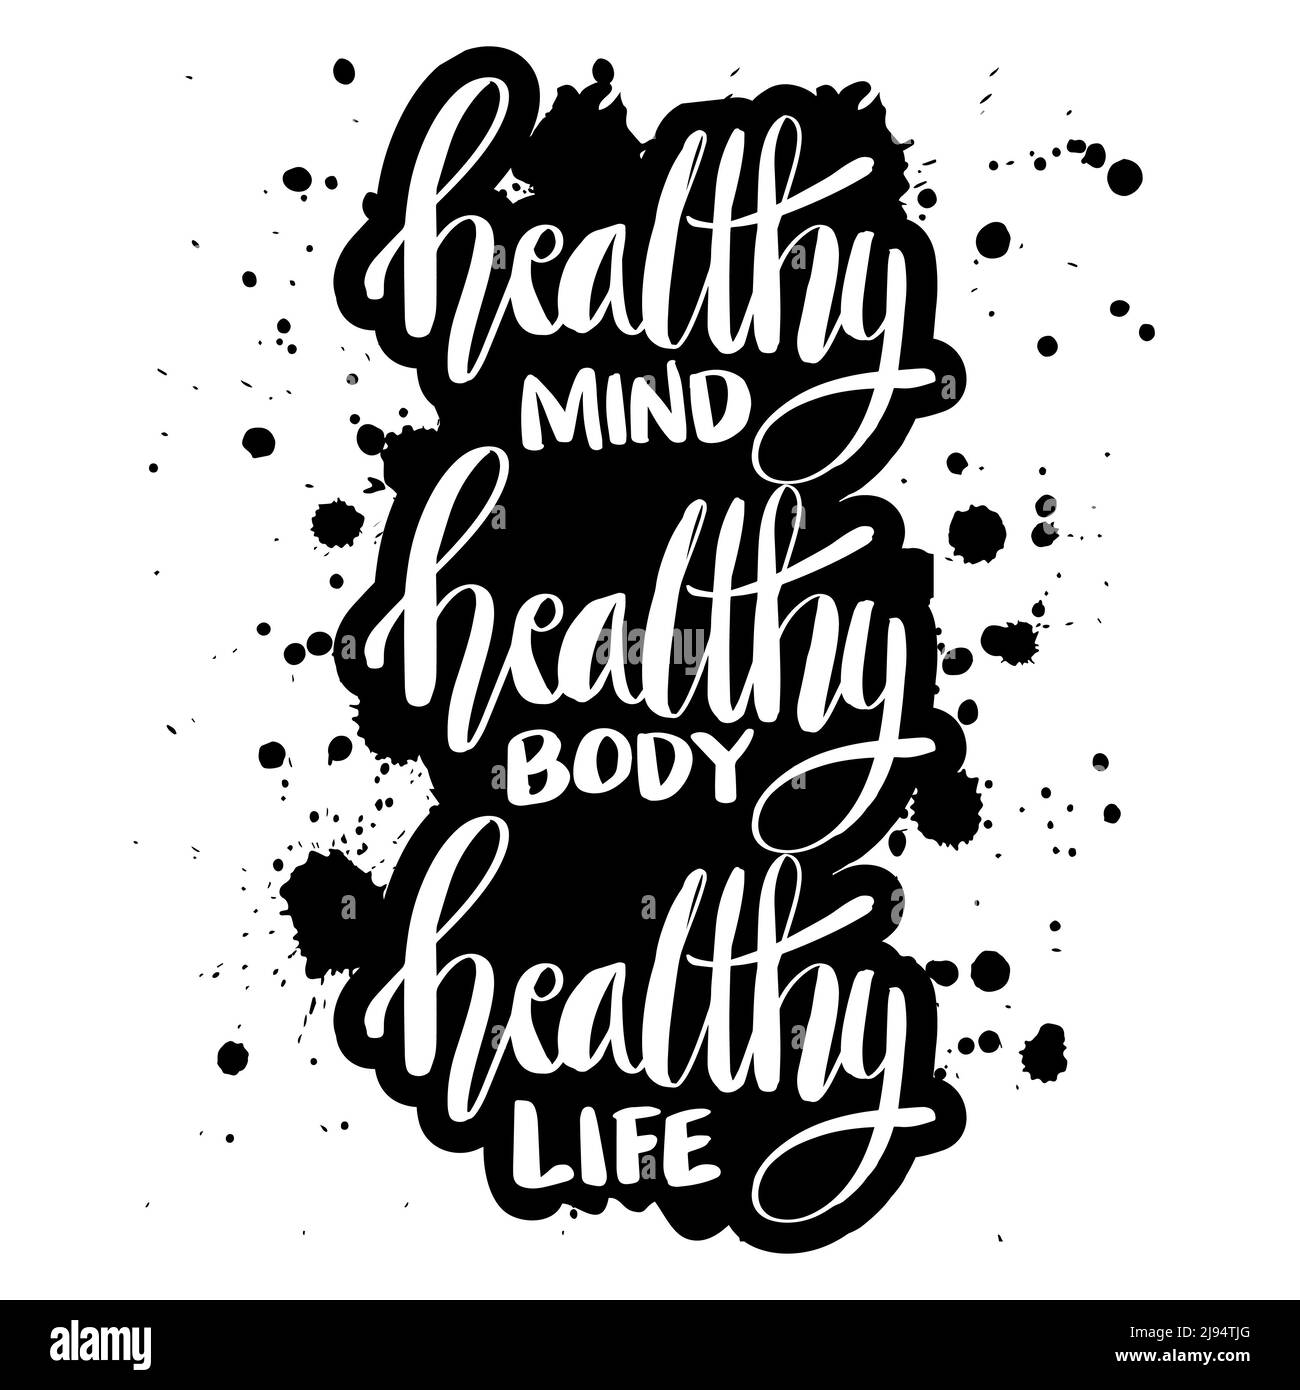 Healthy mind healthy body healthy life. Poster quotes. Stock Photo